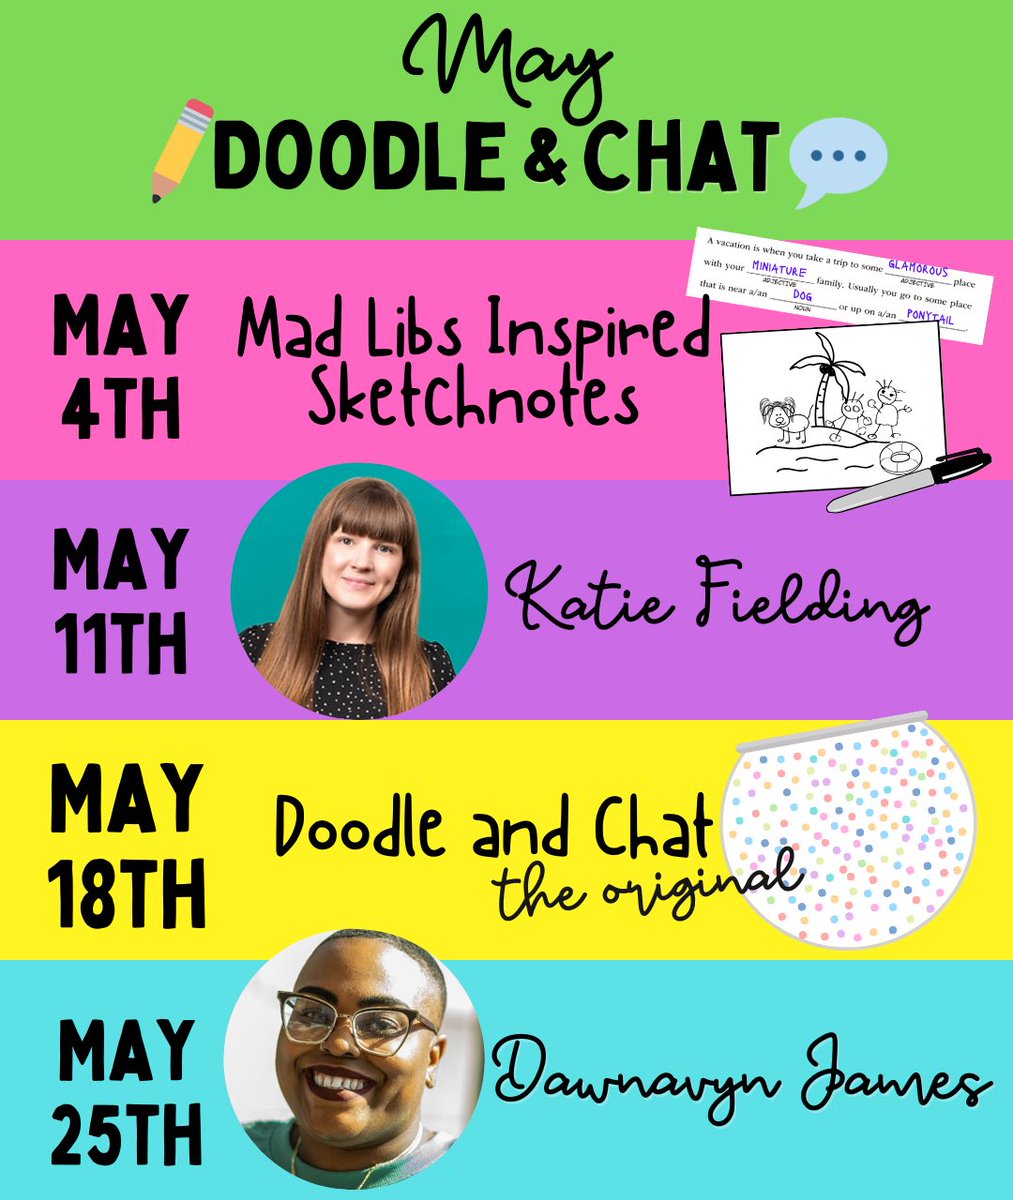 Doodle and Chat EVERY SATURDAY at 9:33-ish a.m.CST…

📆Mad Libs Inspired Sketchnotes 

✏️💬Doodle and Chat w/ Friends: Katie Fielding 

🔮Original Doodle and Chat Fun

✏️💬Doodle and Chat w/ Friends: Dawnavyn James

Join the fun: bit.ly/doodleandchat

#DoodleAndChat